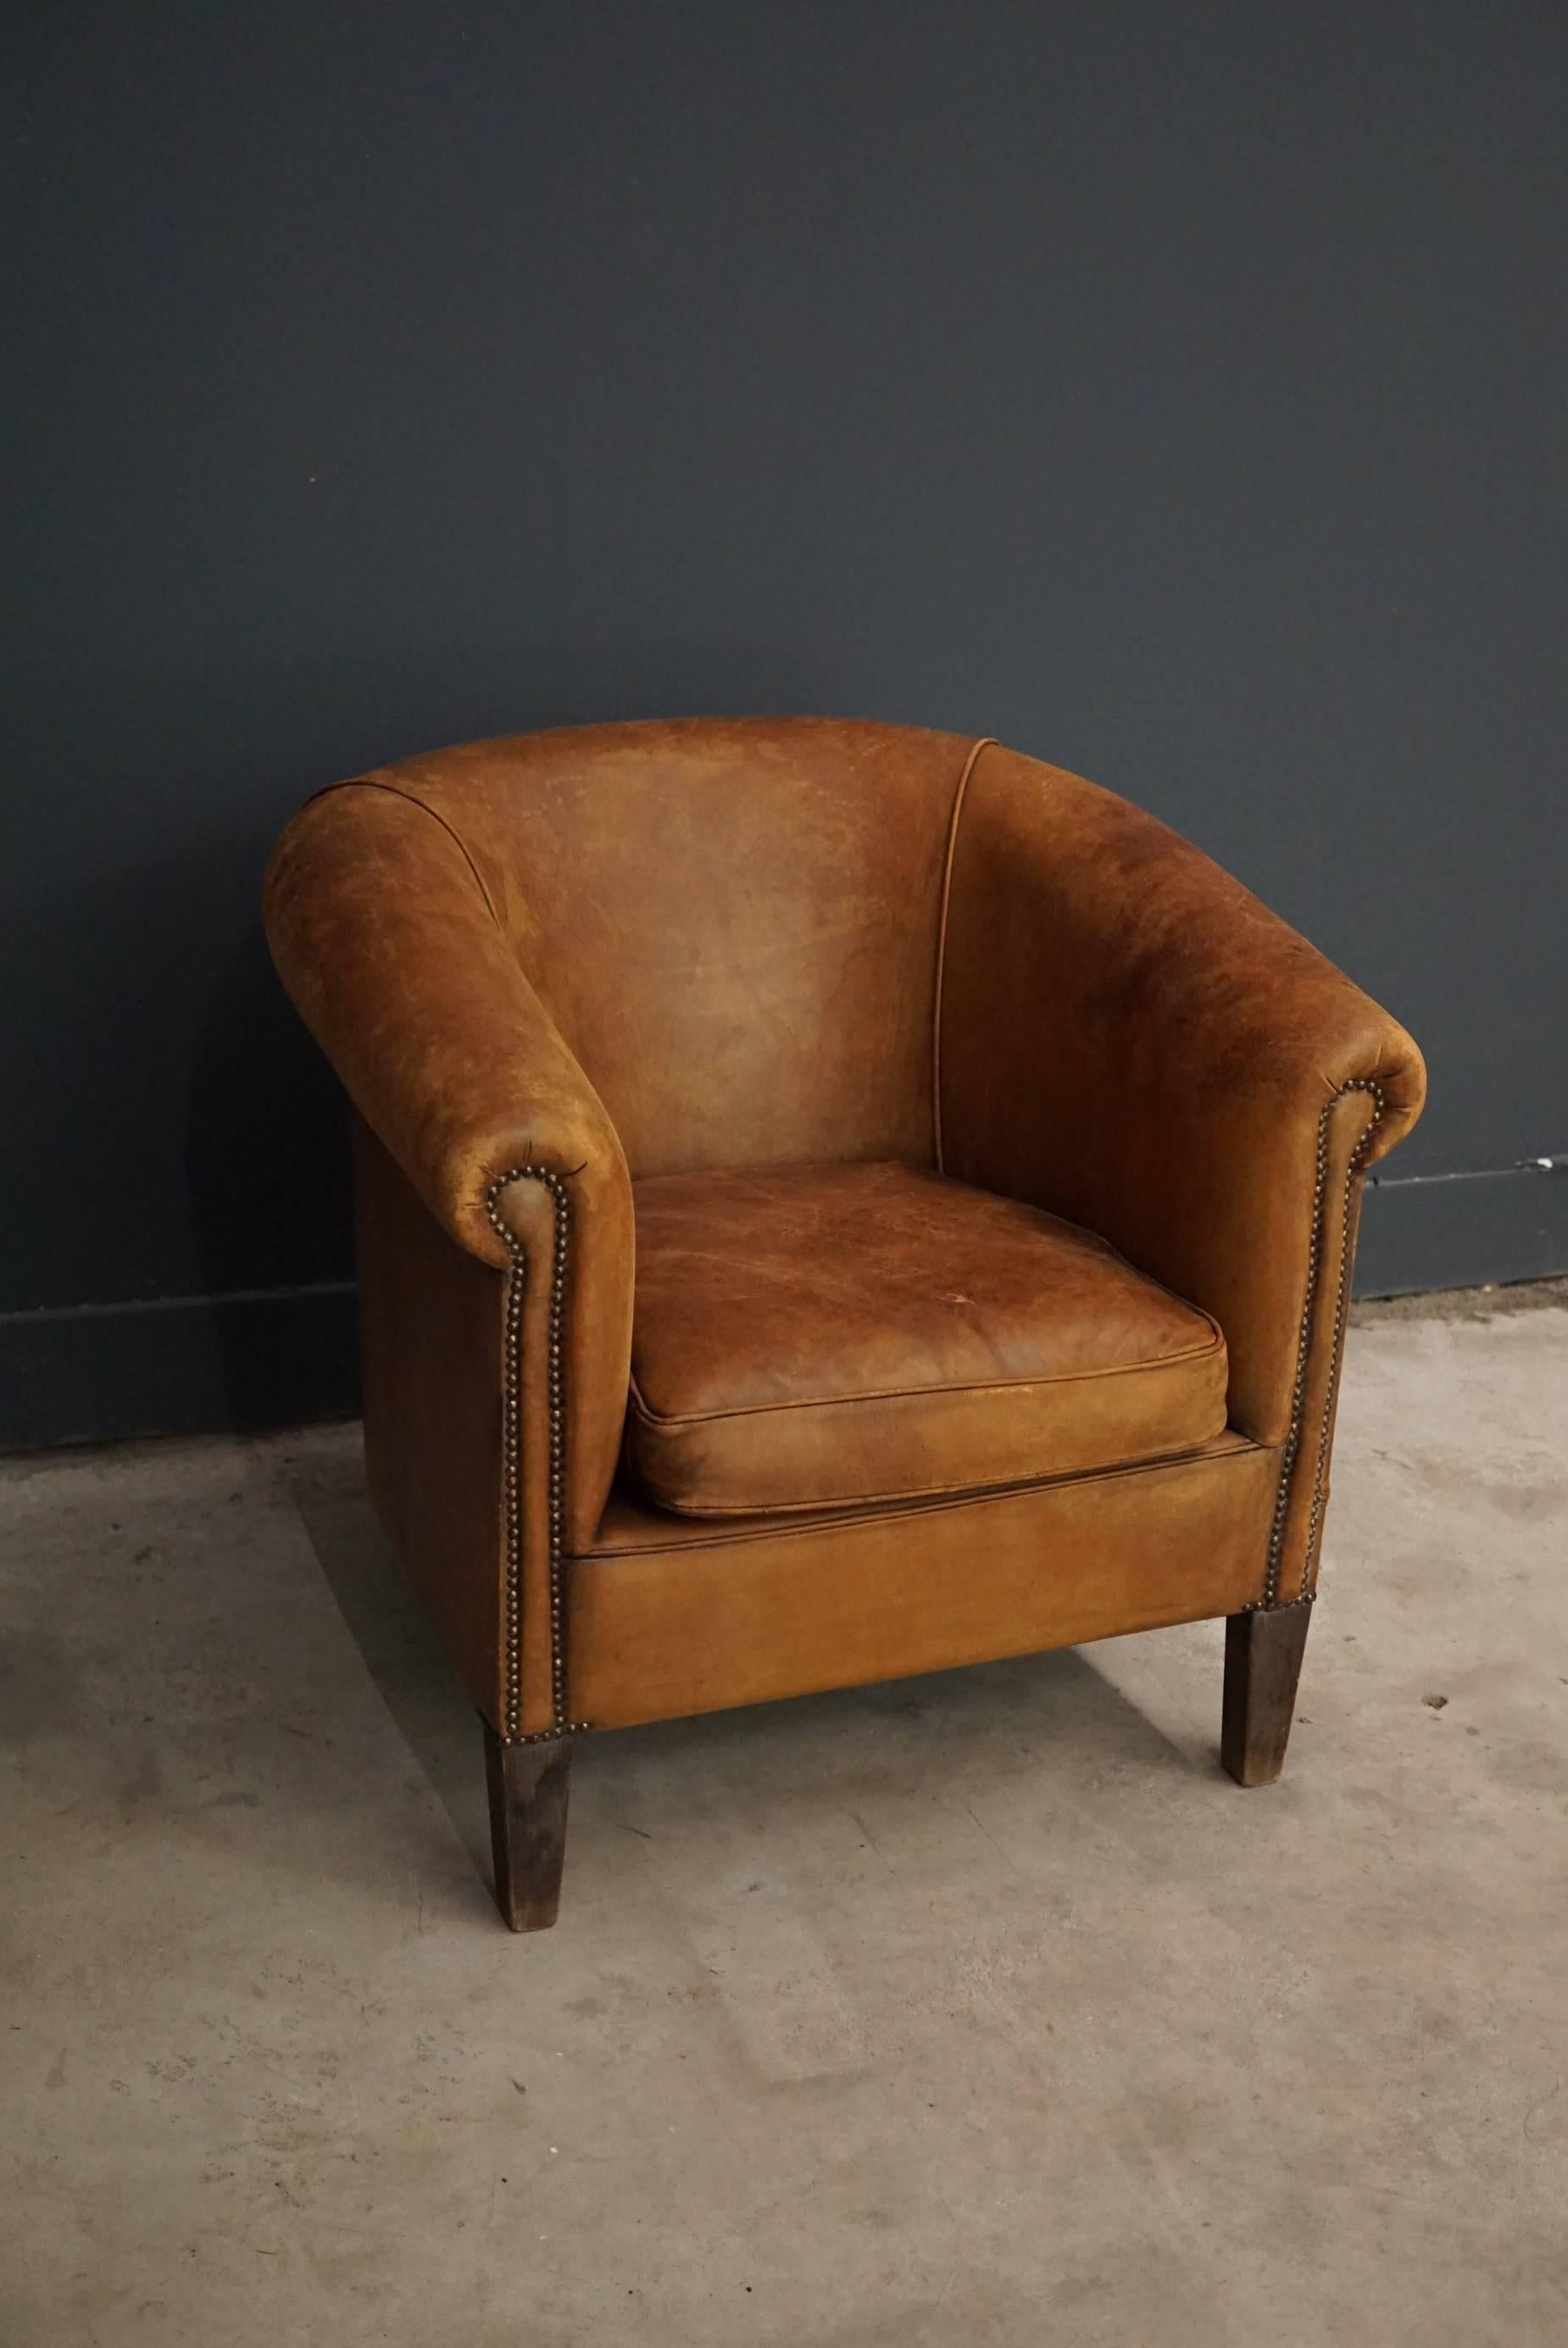 This club chair was designed and produced in France during the second half of the 20th century. The chair is made from cognac leather held together with metal pins and mounted on wooden legs. The lounge chair is in a vintage well used condition.